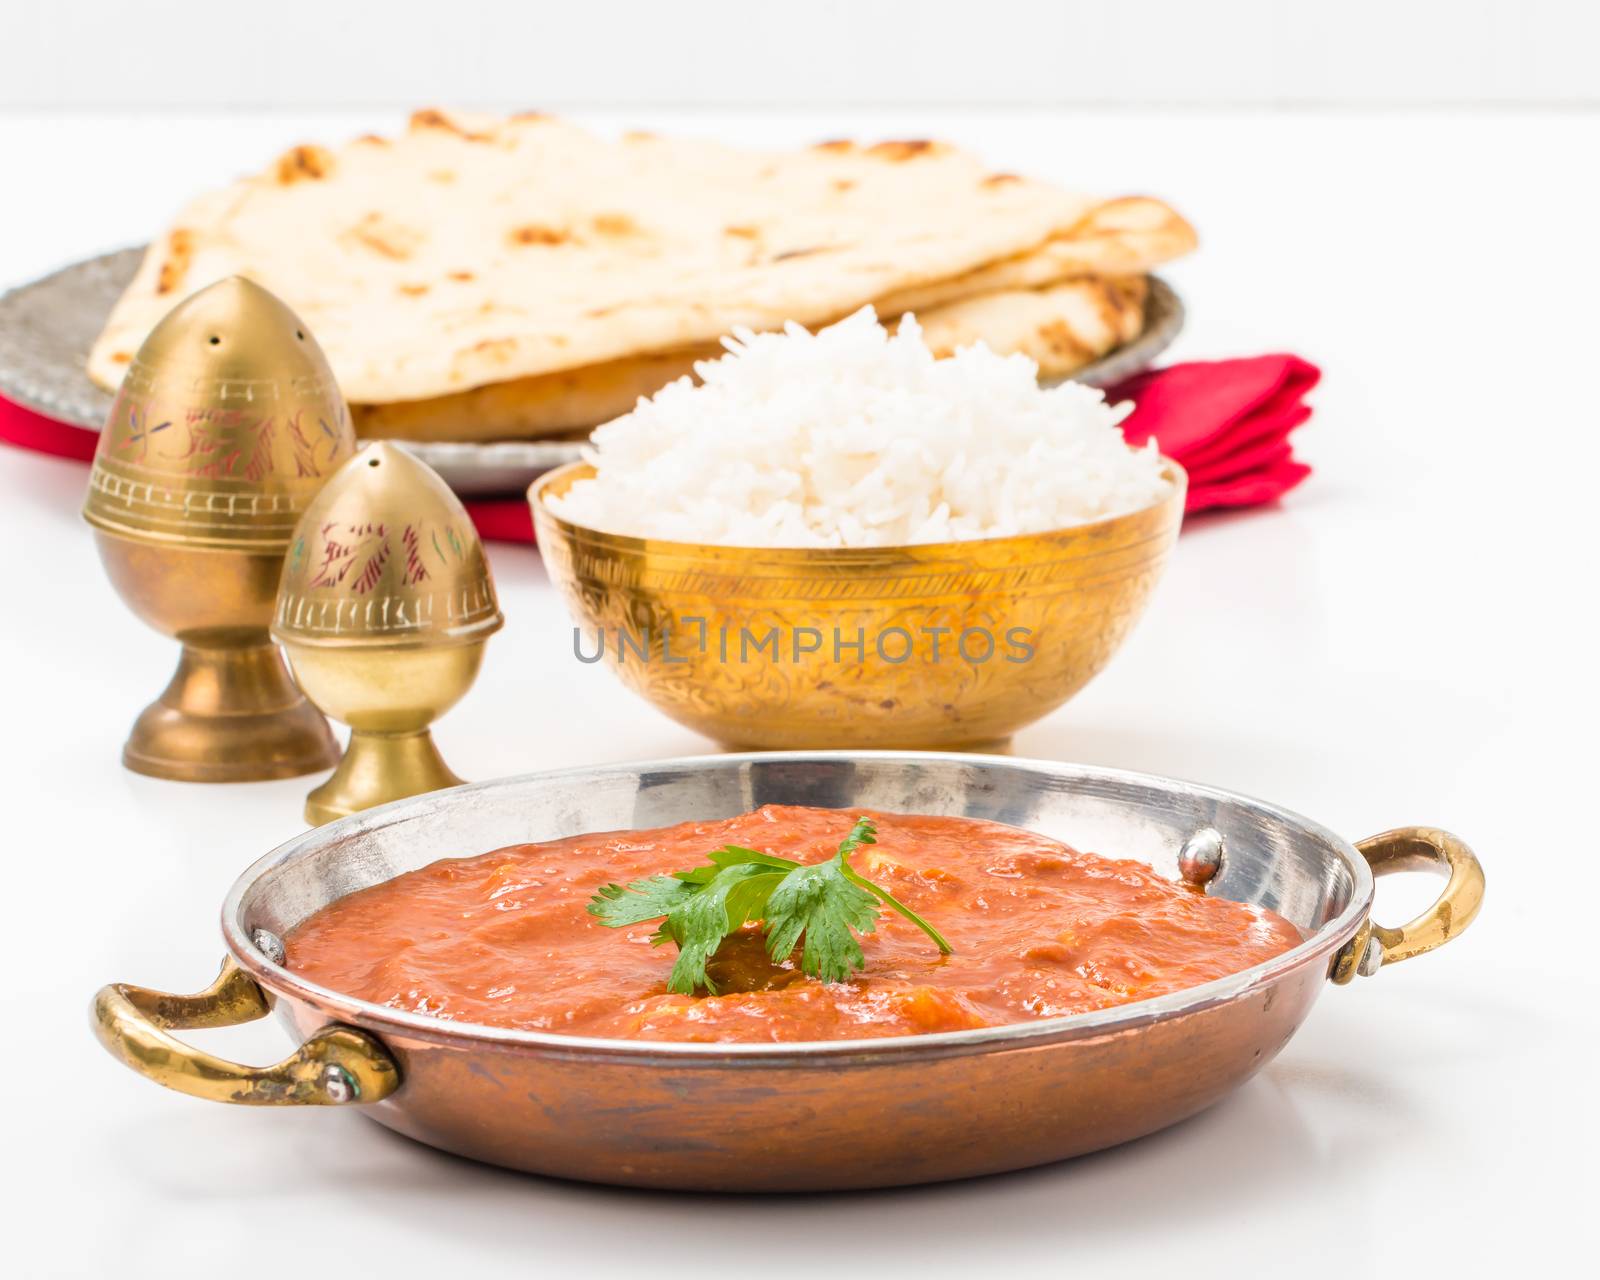 Butter Chicken Rice and Bread by billberryphotography